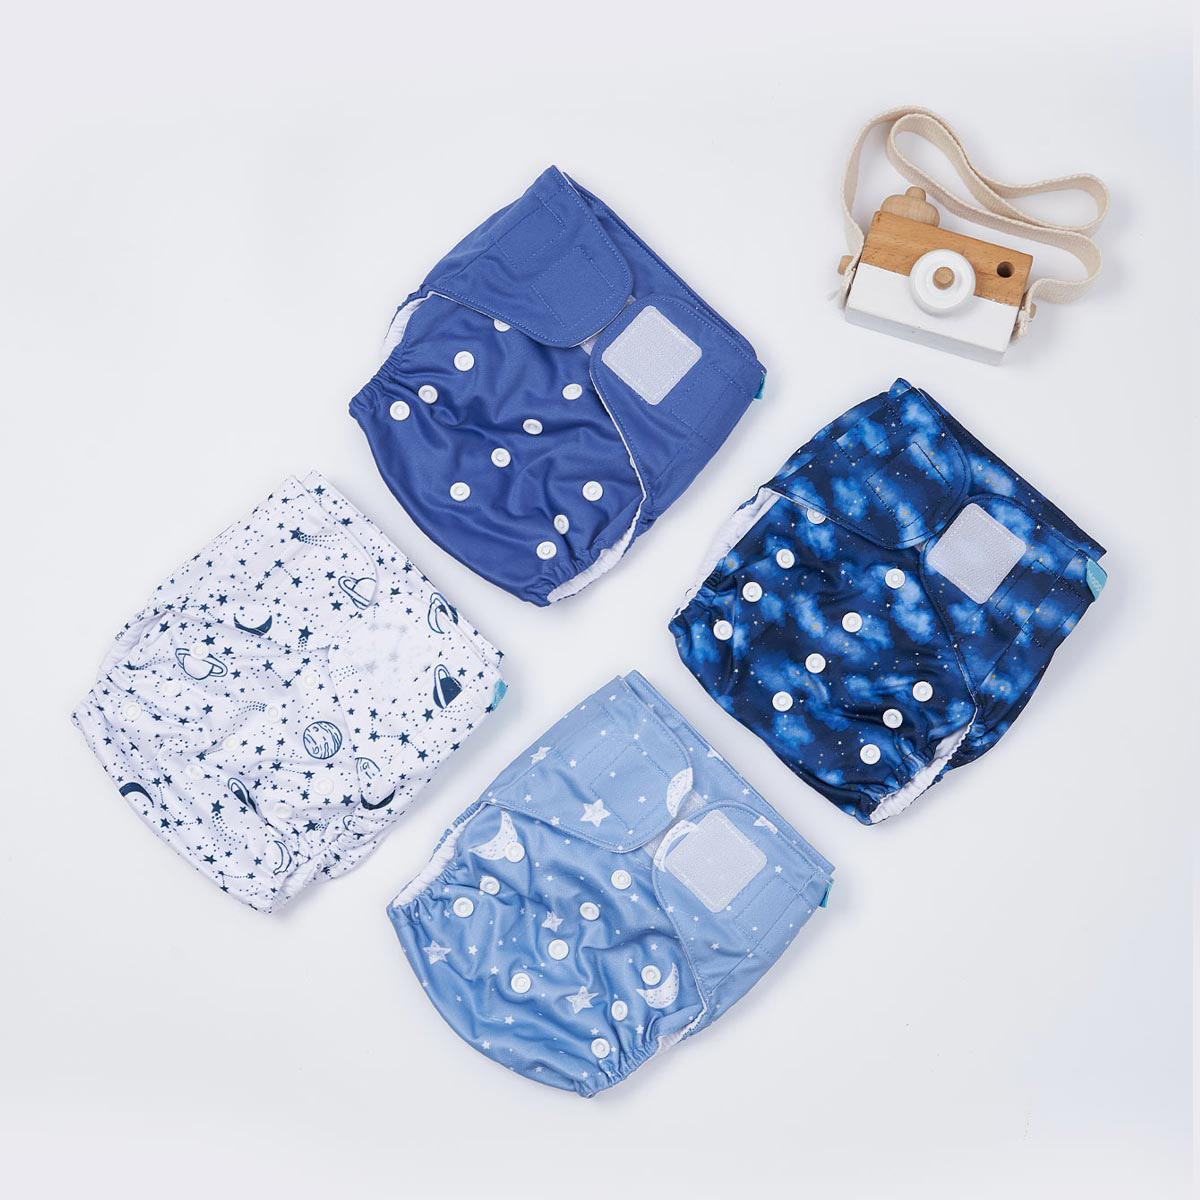 towel nappy/diaper & plastic nappy/diaper reuseable washable diapers